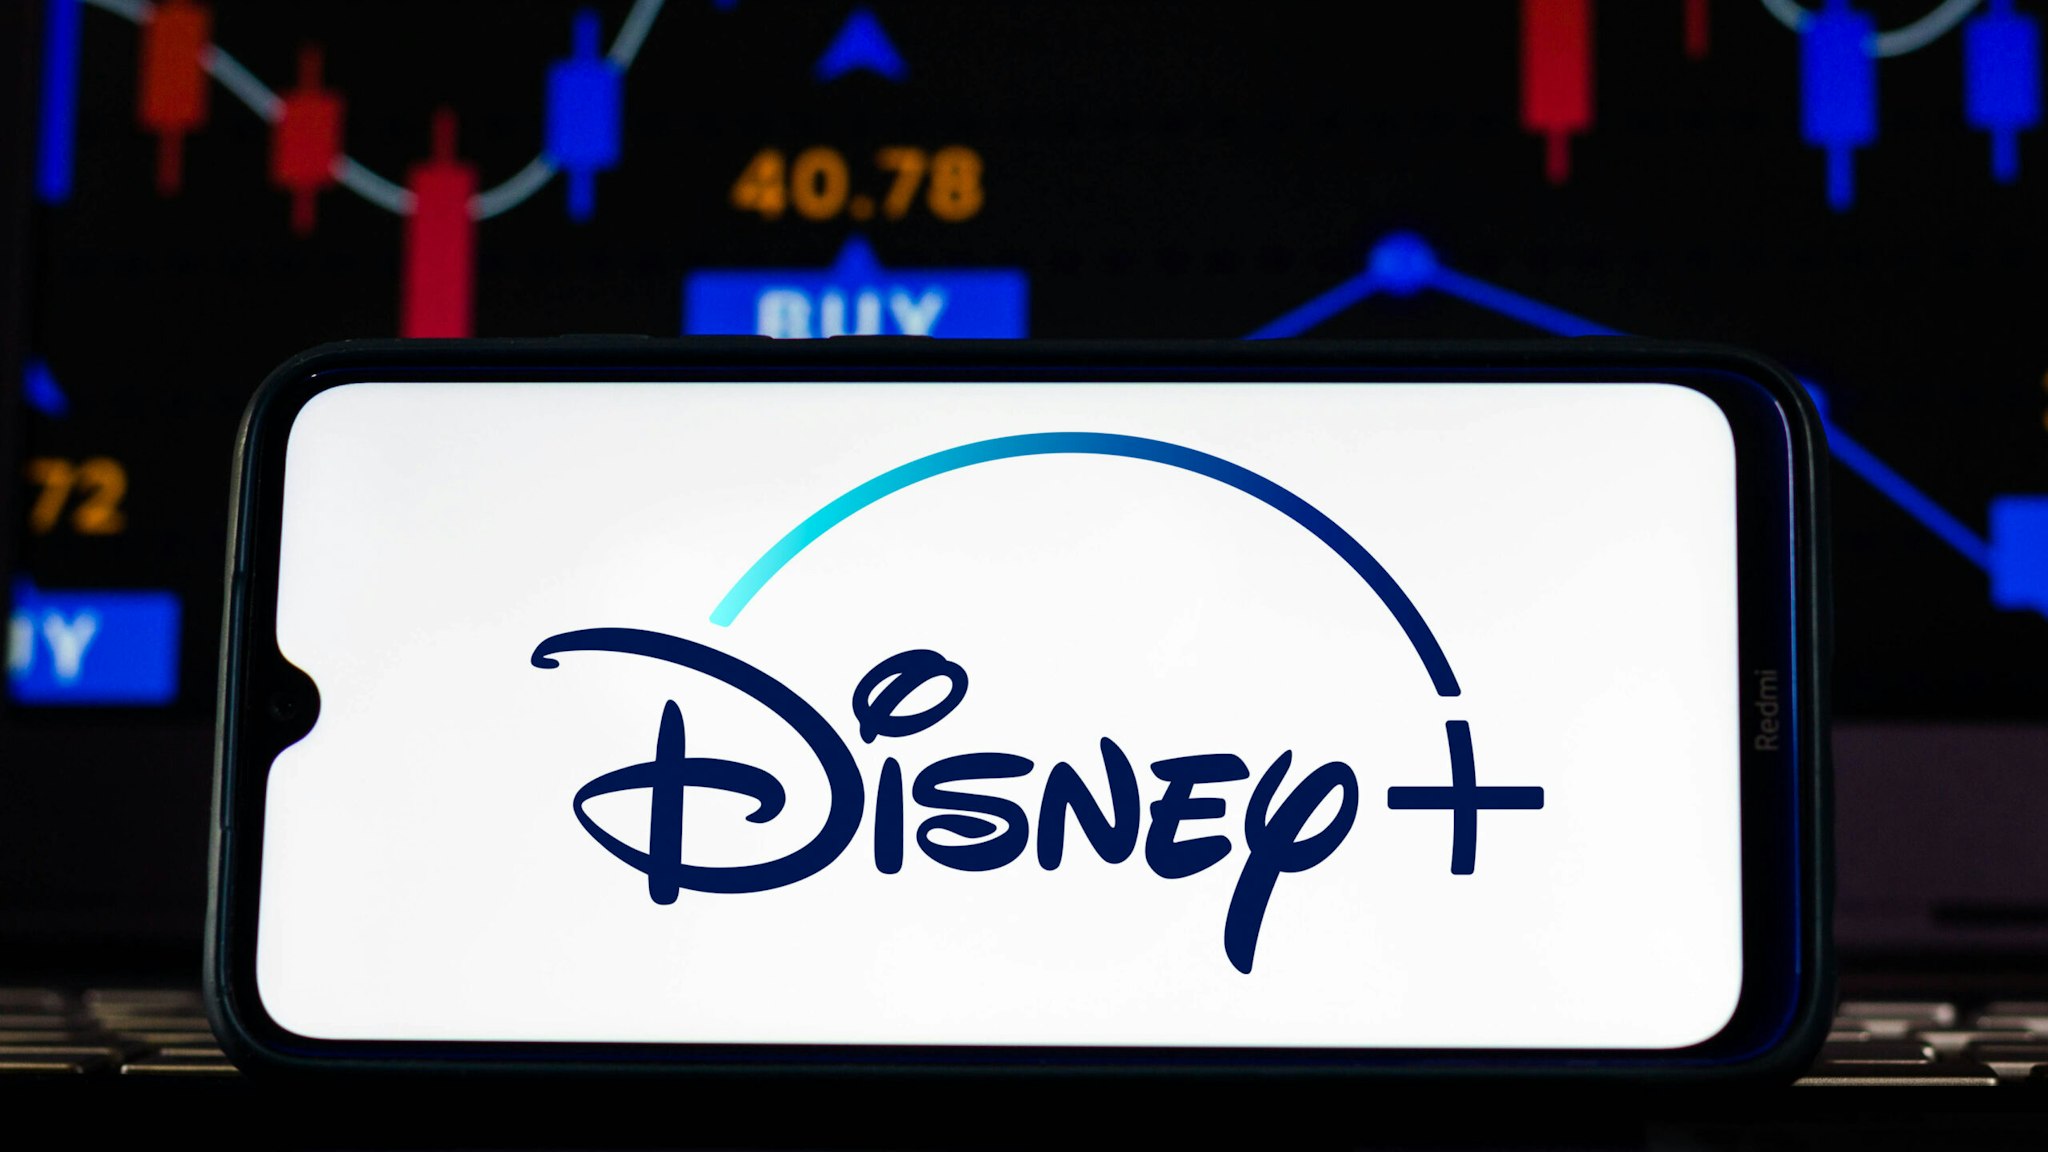 BRAZIL - 2021/02/12: In this photo illustration the Disney+ (Plus) logo seen displayed on a smartphone screen.